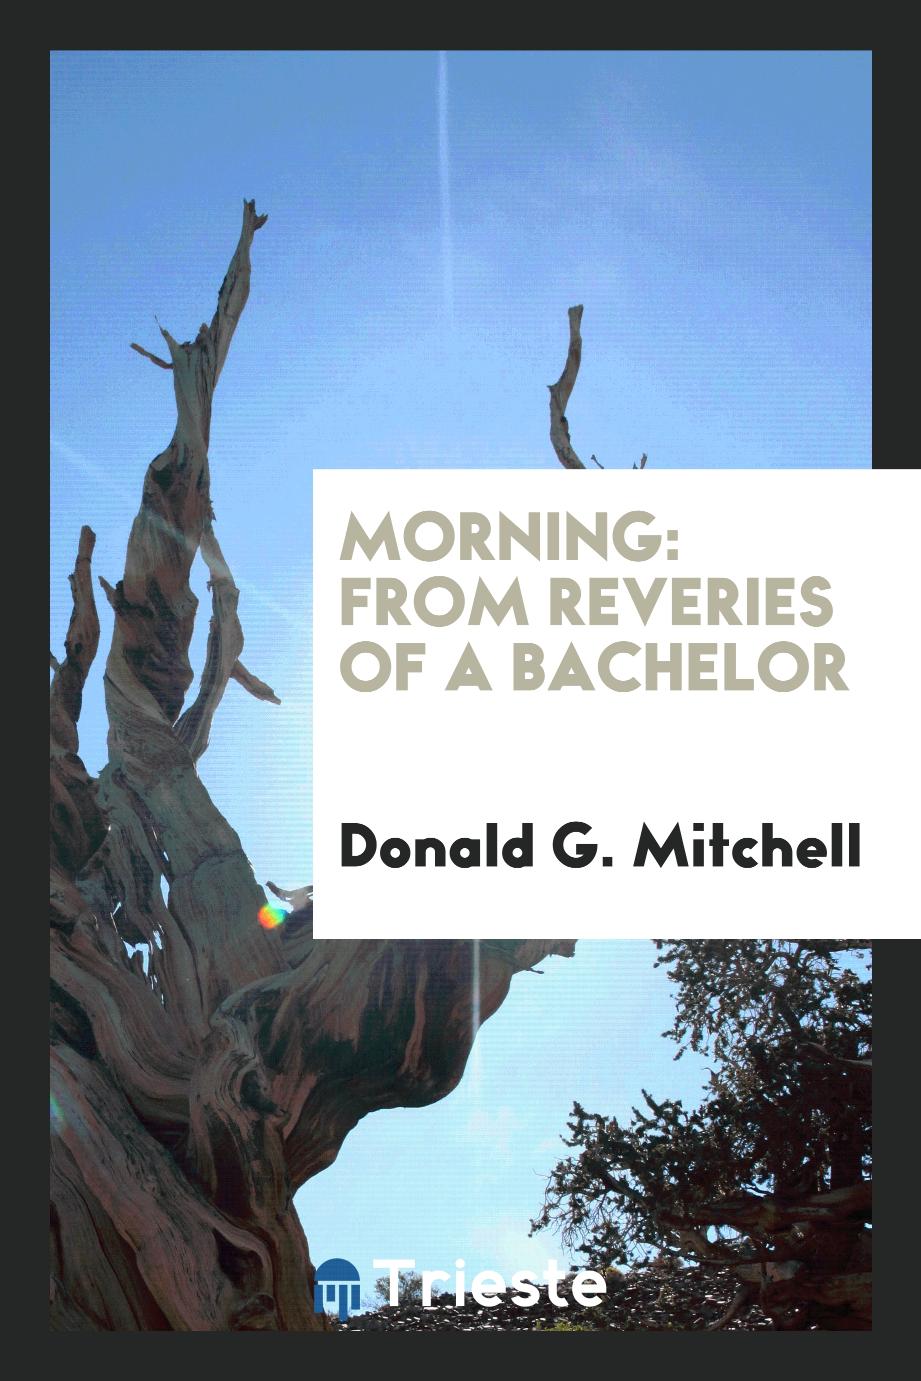 Morning: From Reveries of a Bachelor